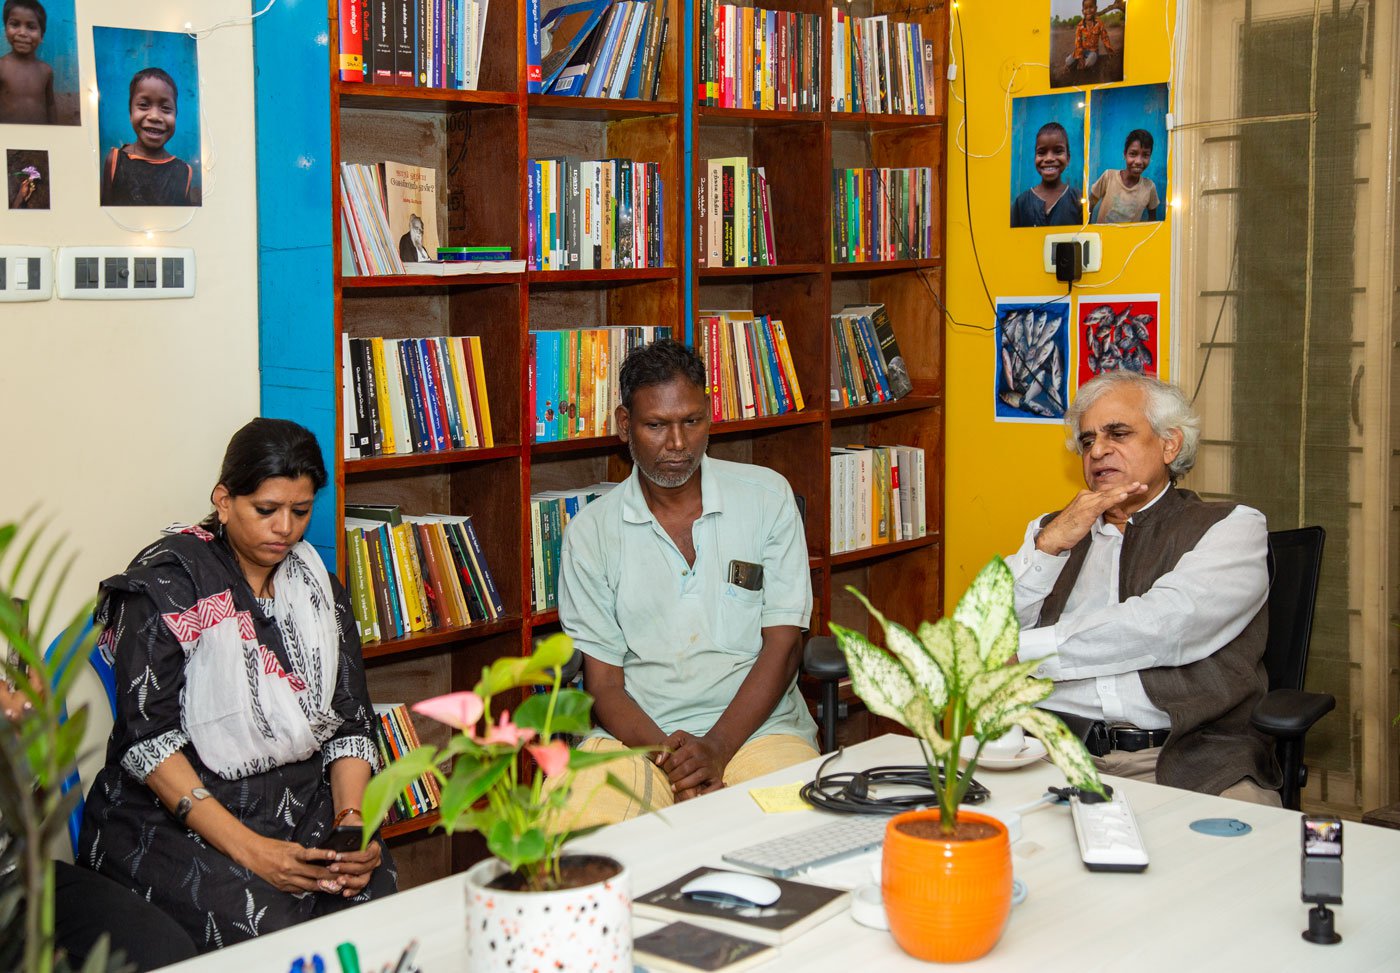 Taken on Palani Studio's opening day, the three pillars of Palani's life in photography: Kavitha Muralitharan, Ezhil anna and P. Sainath. The studio aims to train young people from socially and economically backward communities.